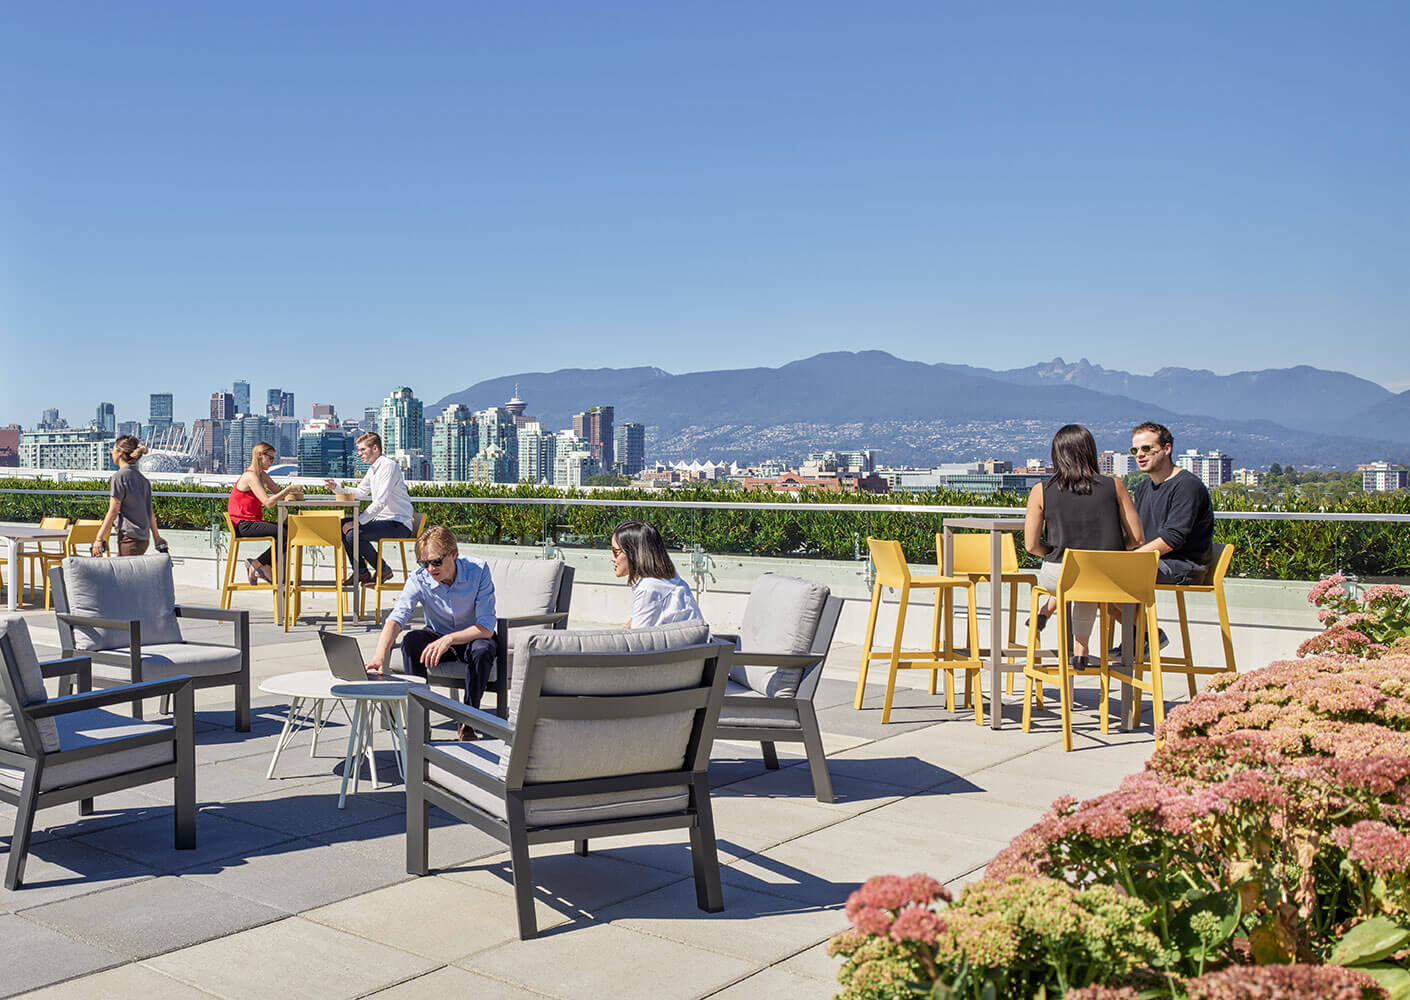 View of rooftop amenity with expansive views of the city and North Shore mountains.